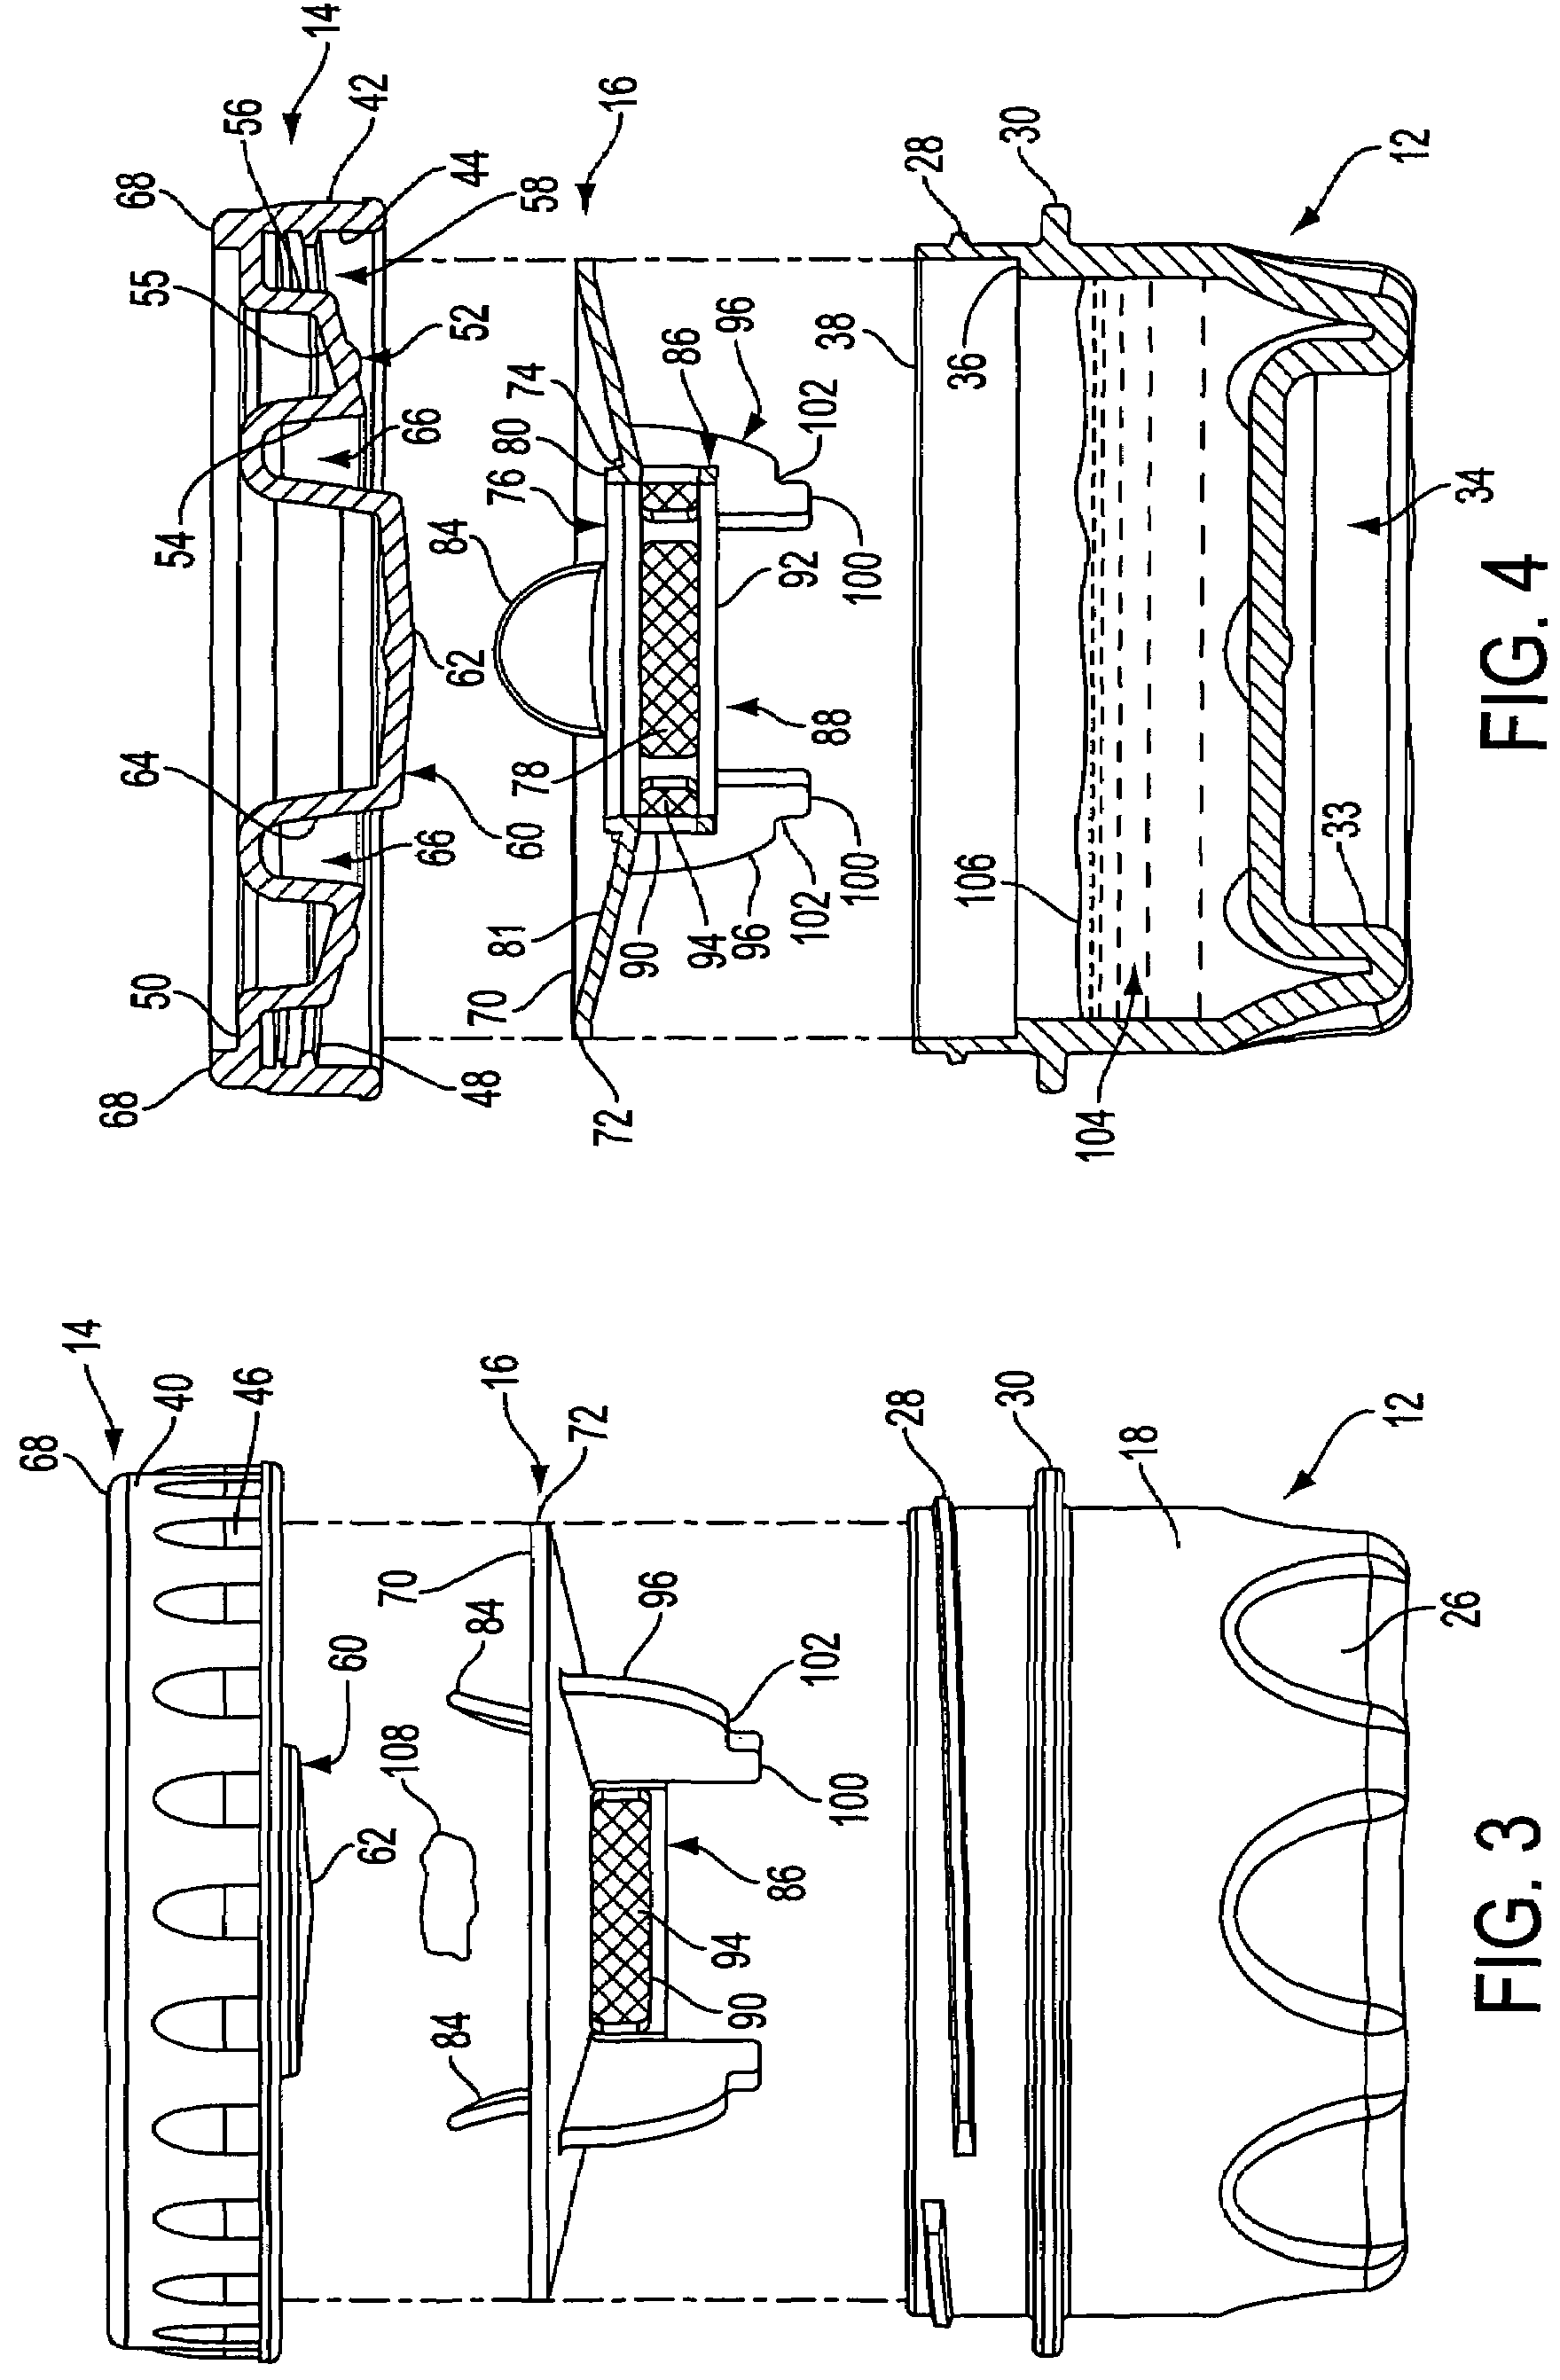 Method and apparatus for transporting biological samples